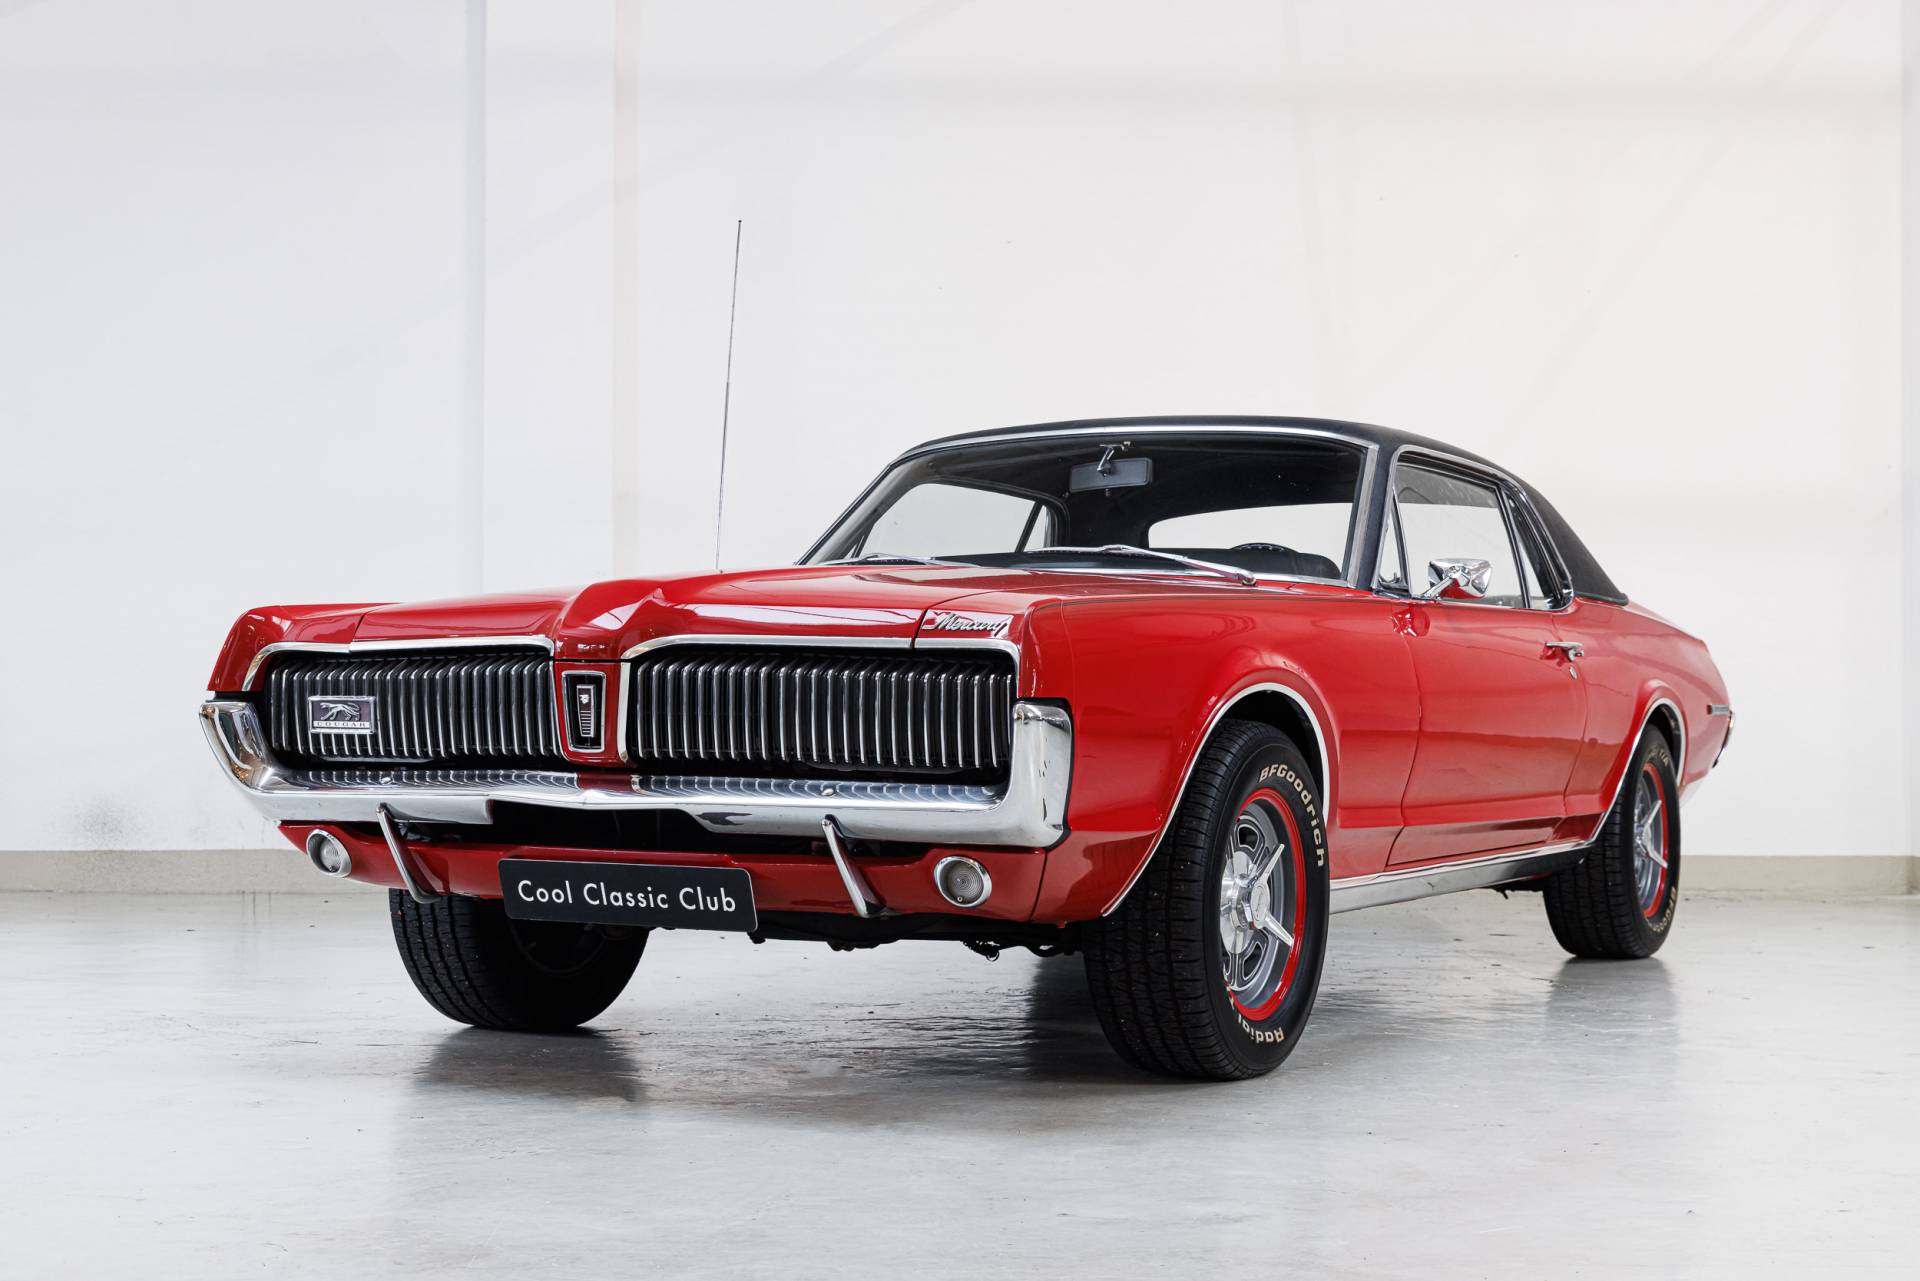 For Sale: Mercury Cougar (1967) offered for £30,805